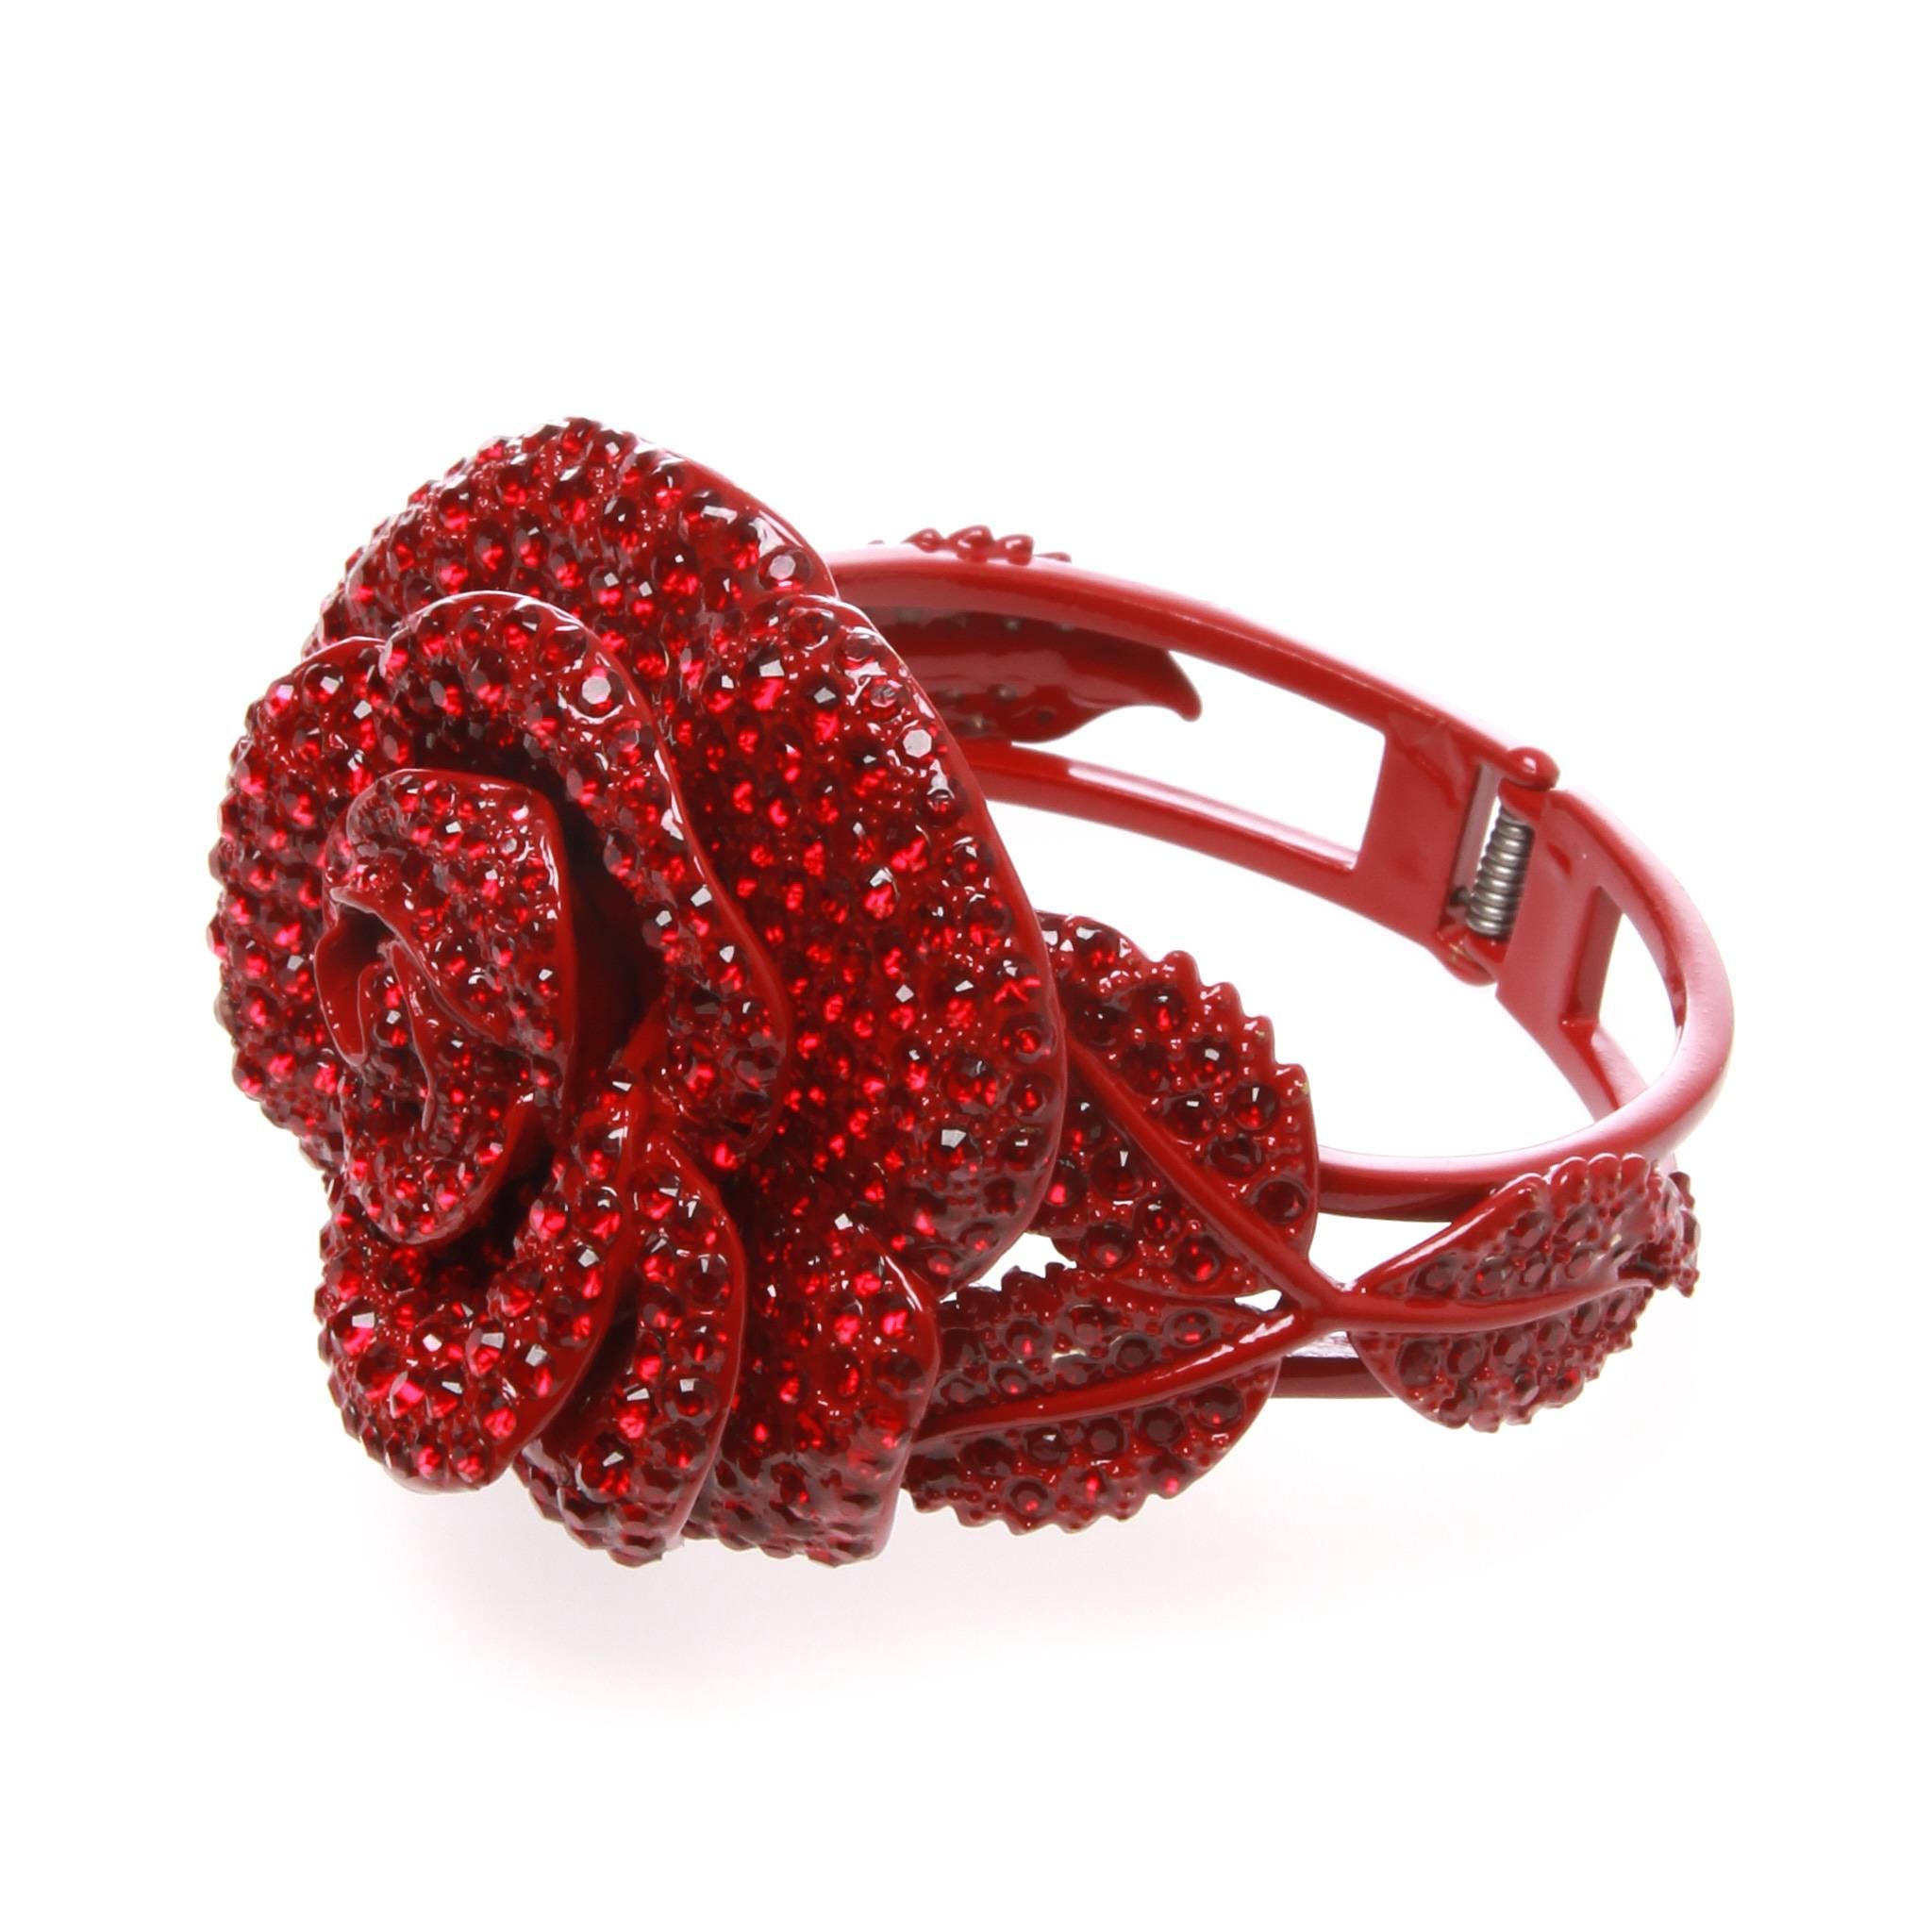 This is an eye-catching Valentino Garavani Swarovski Rose Cuff Bracelet.
It features a large rose with leaves, patterned with Red Swarovski Crystals throughout.
A spring mechanism provides a flexibility and room for the wrist.
Closure/ Opening: